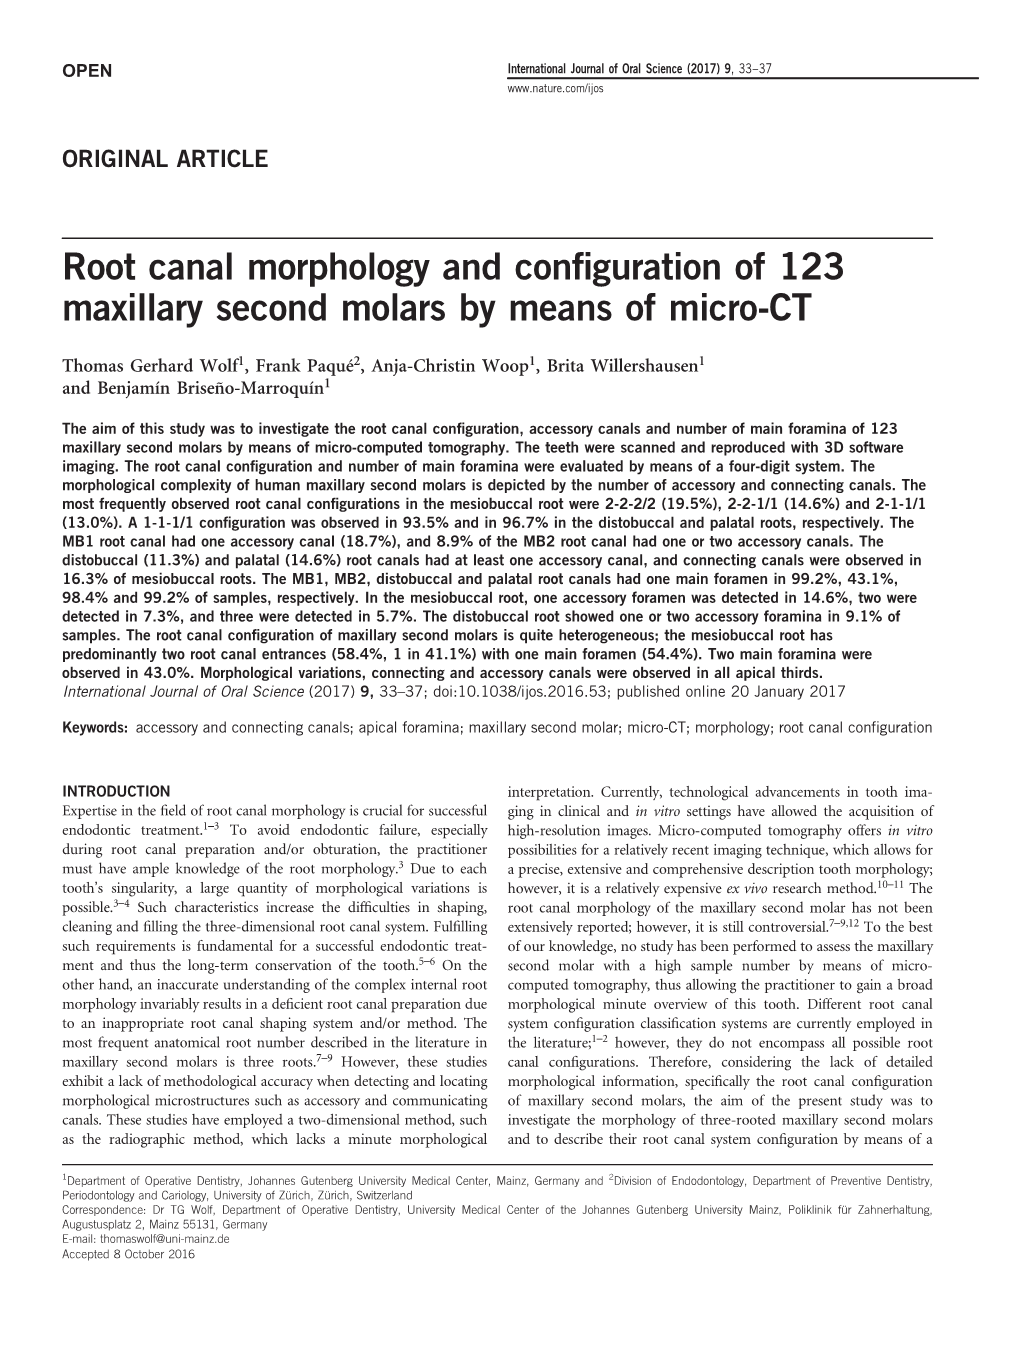 Root Canal Morphology and Configuration of 123 Maxillary